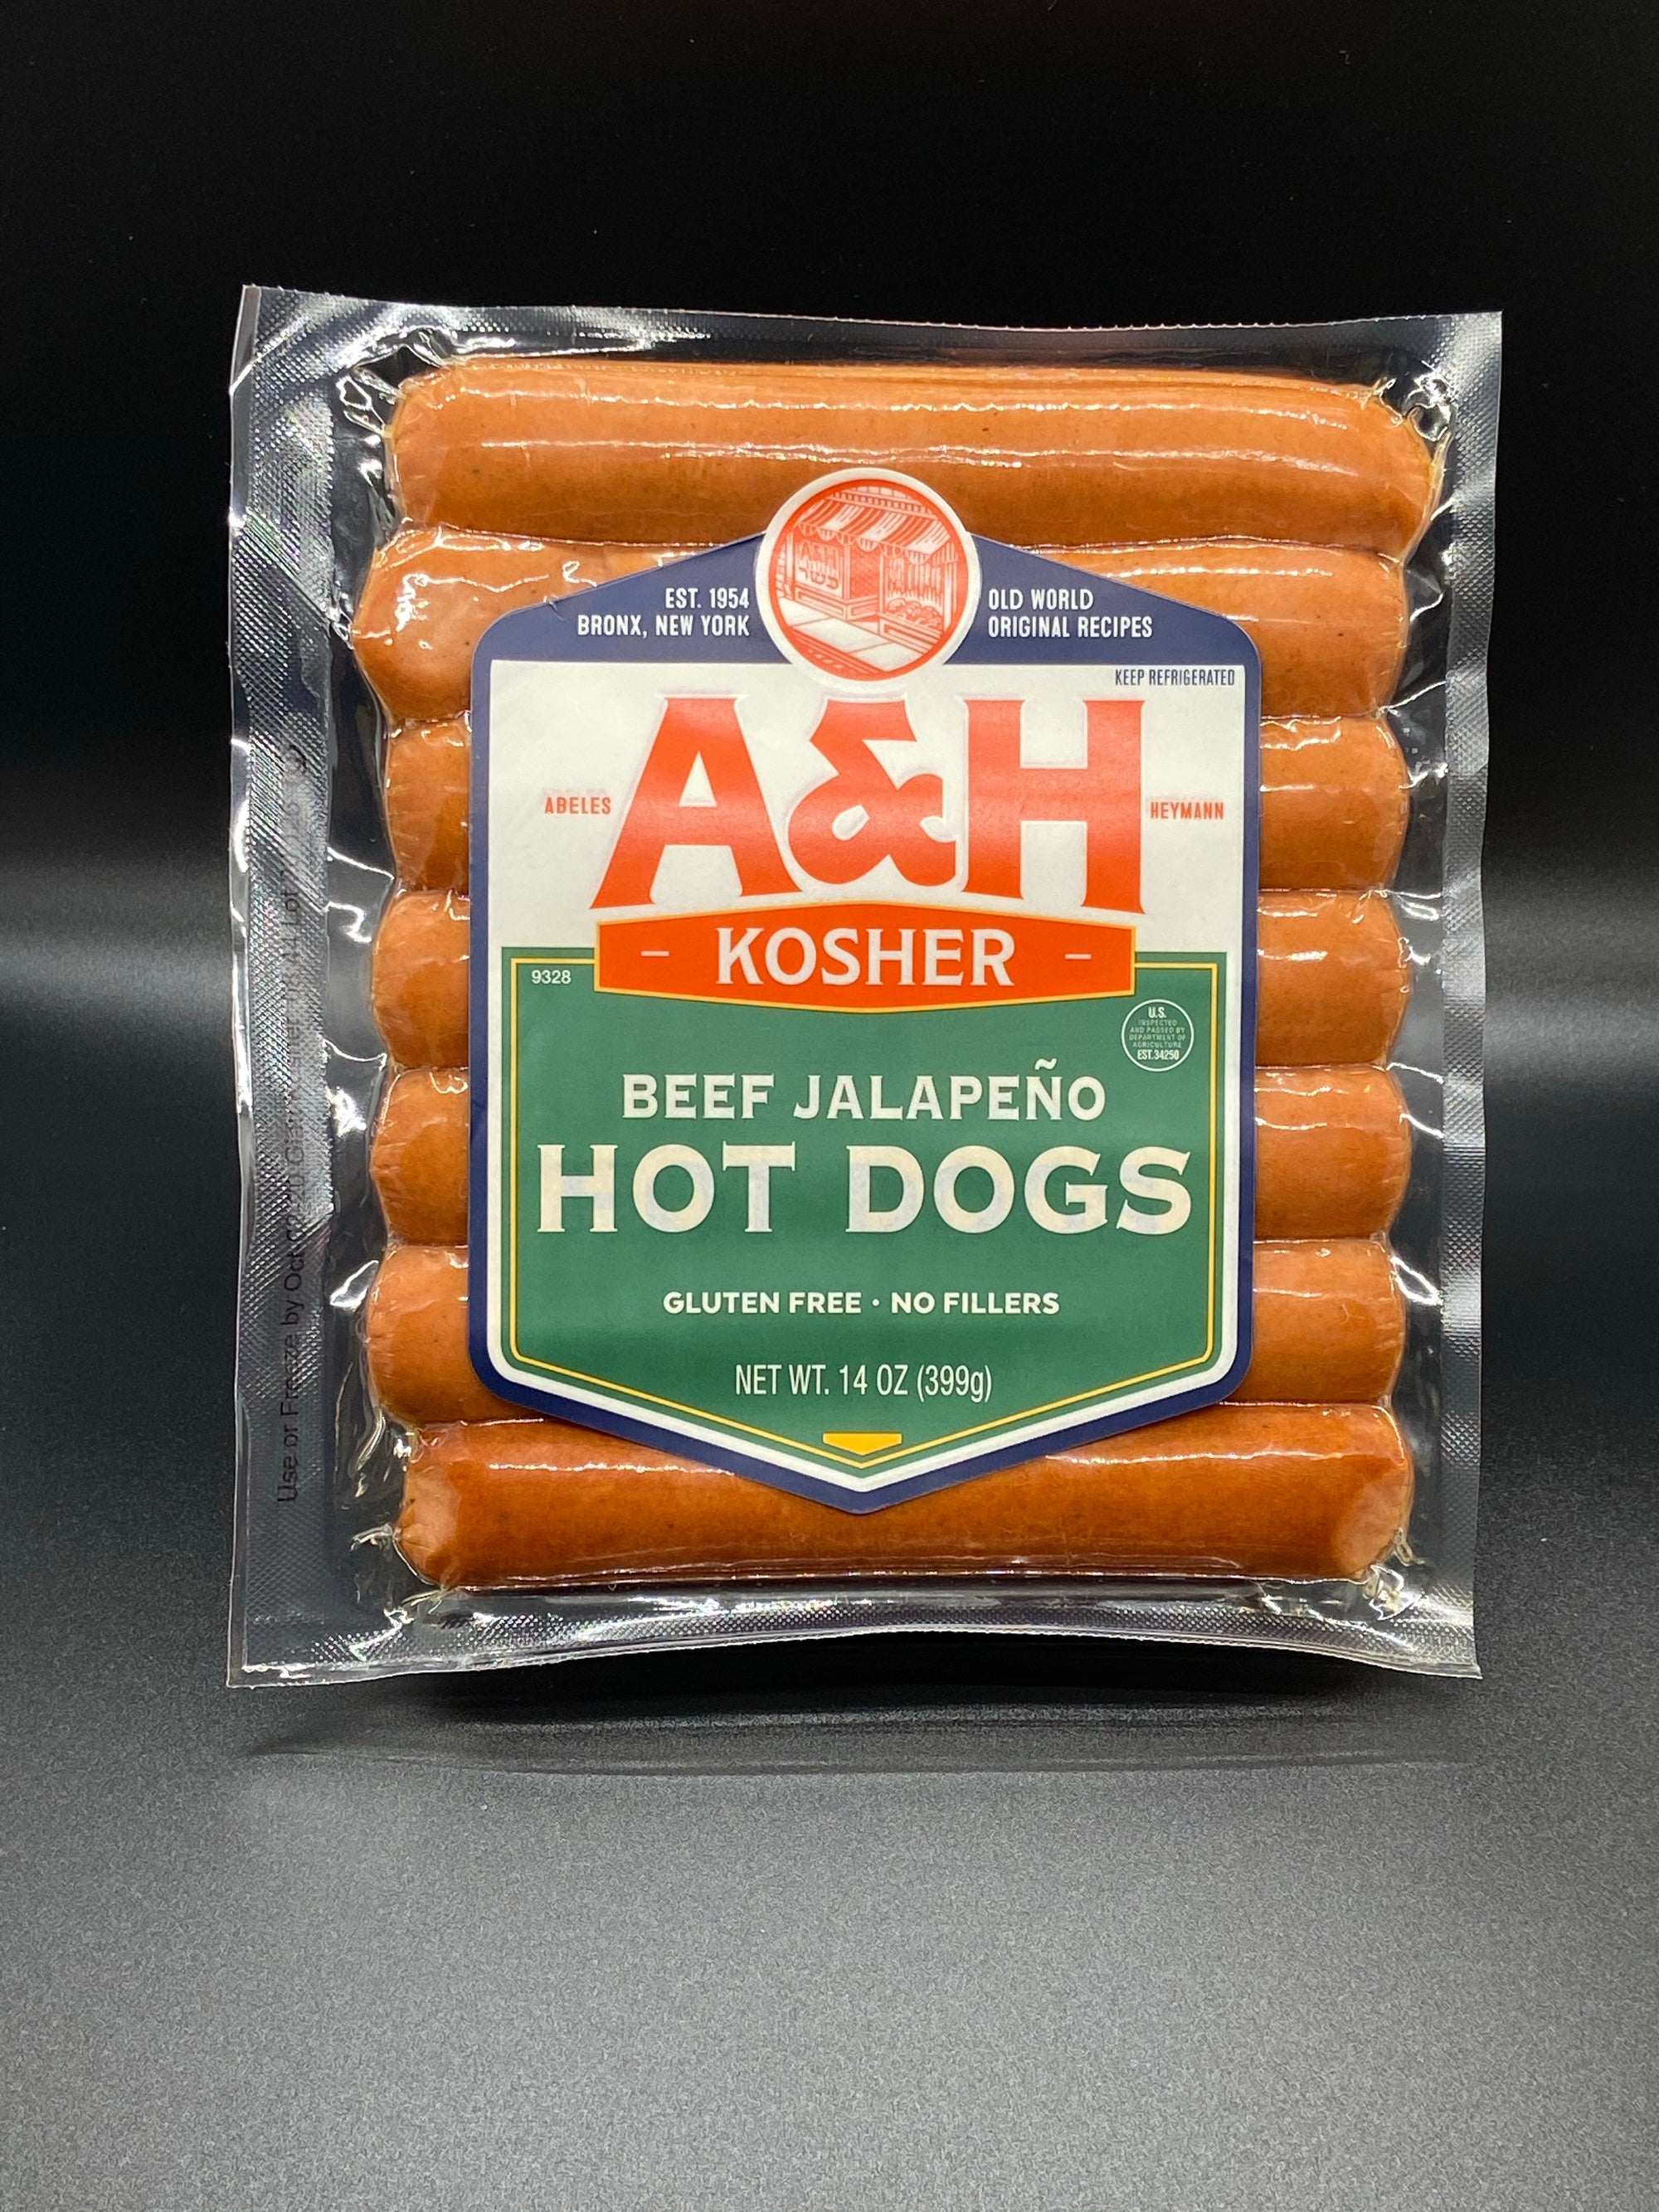 All Beef Jalapeno Hot Dogs 14 oz.